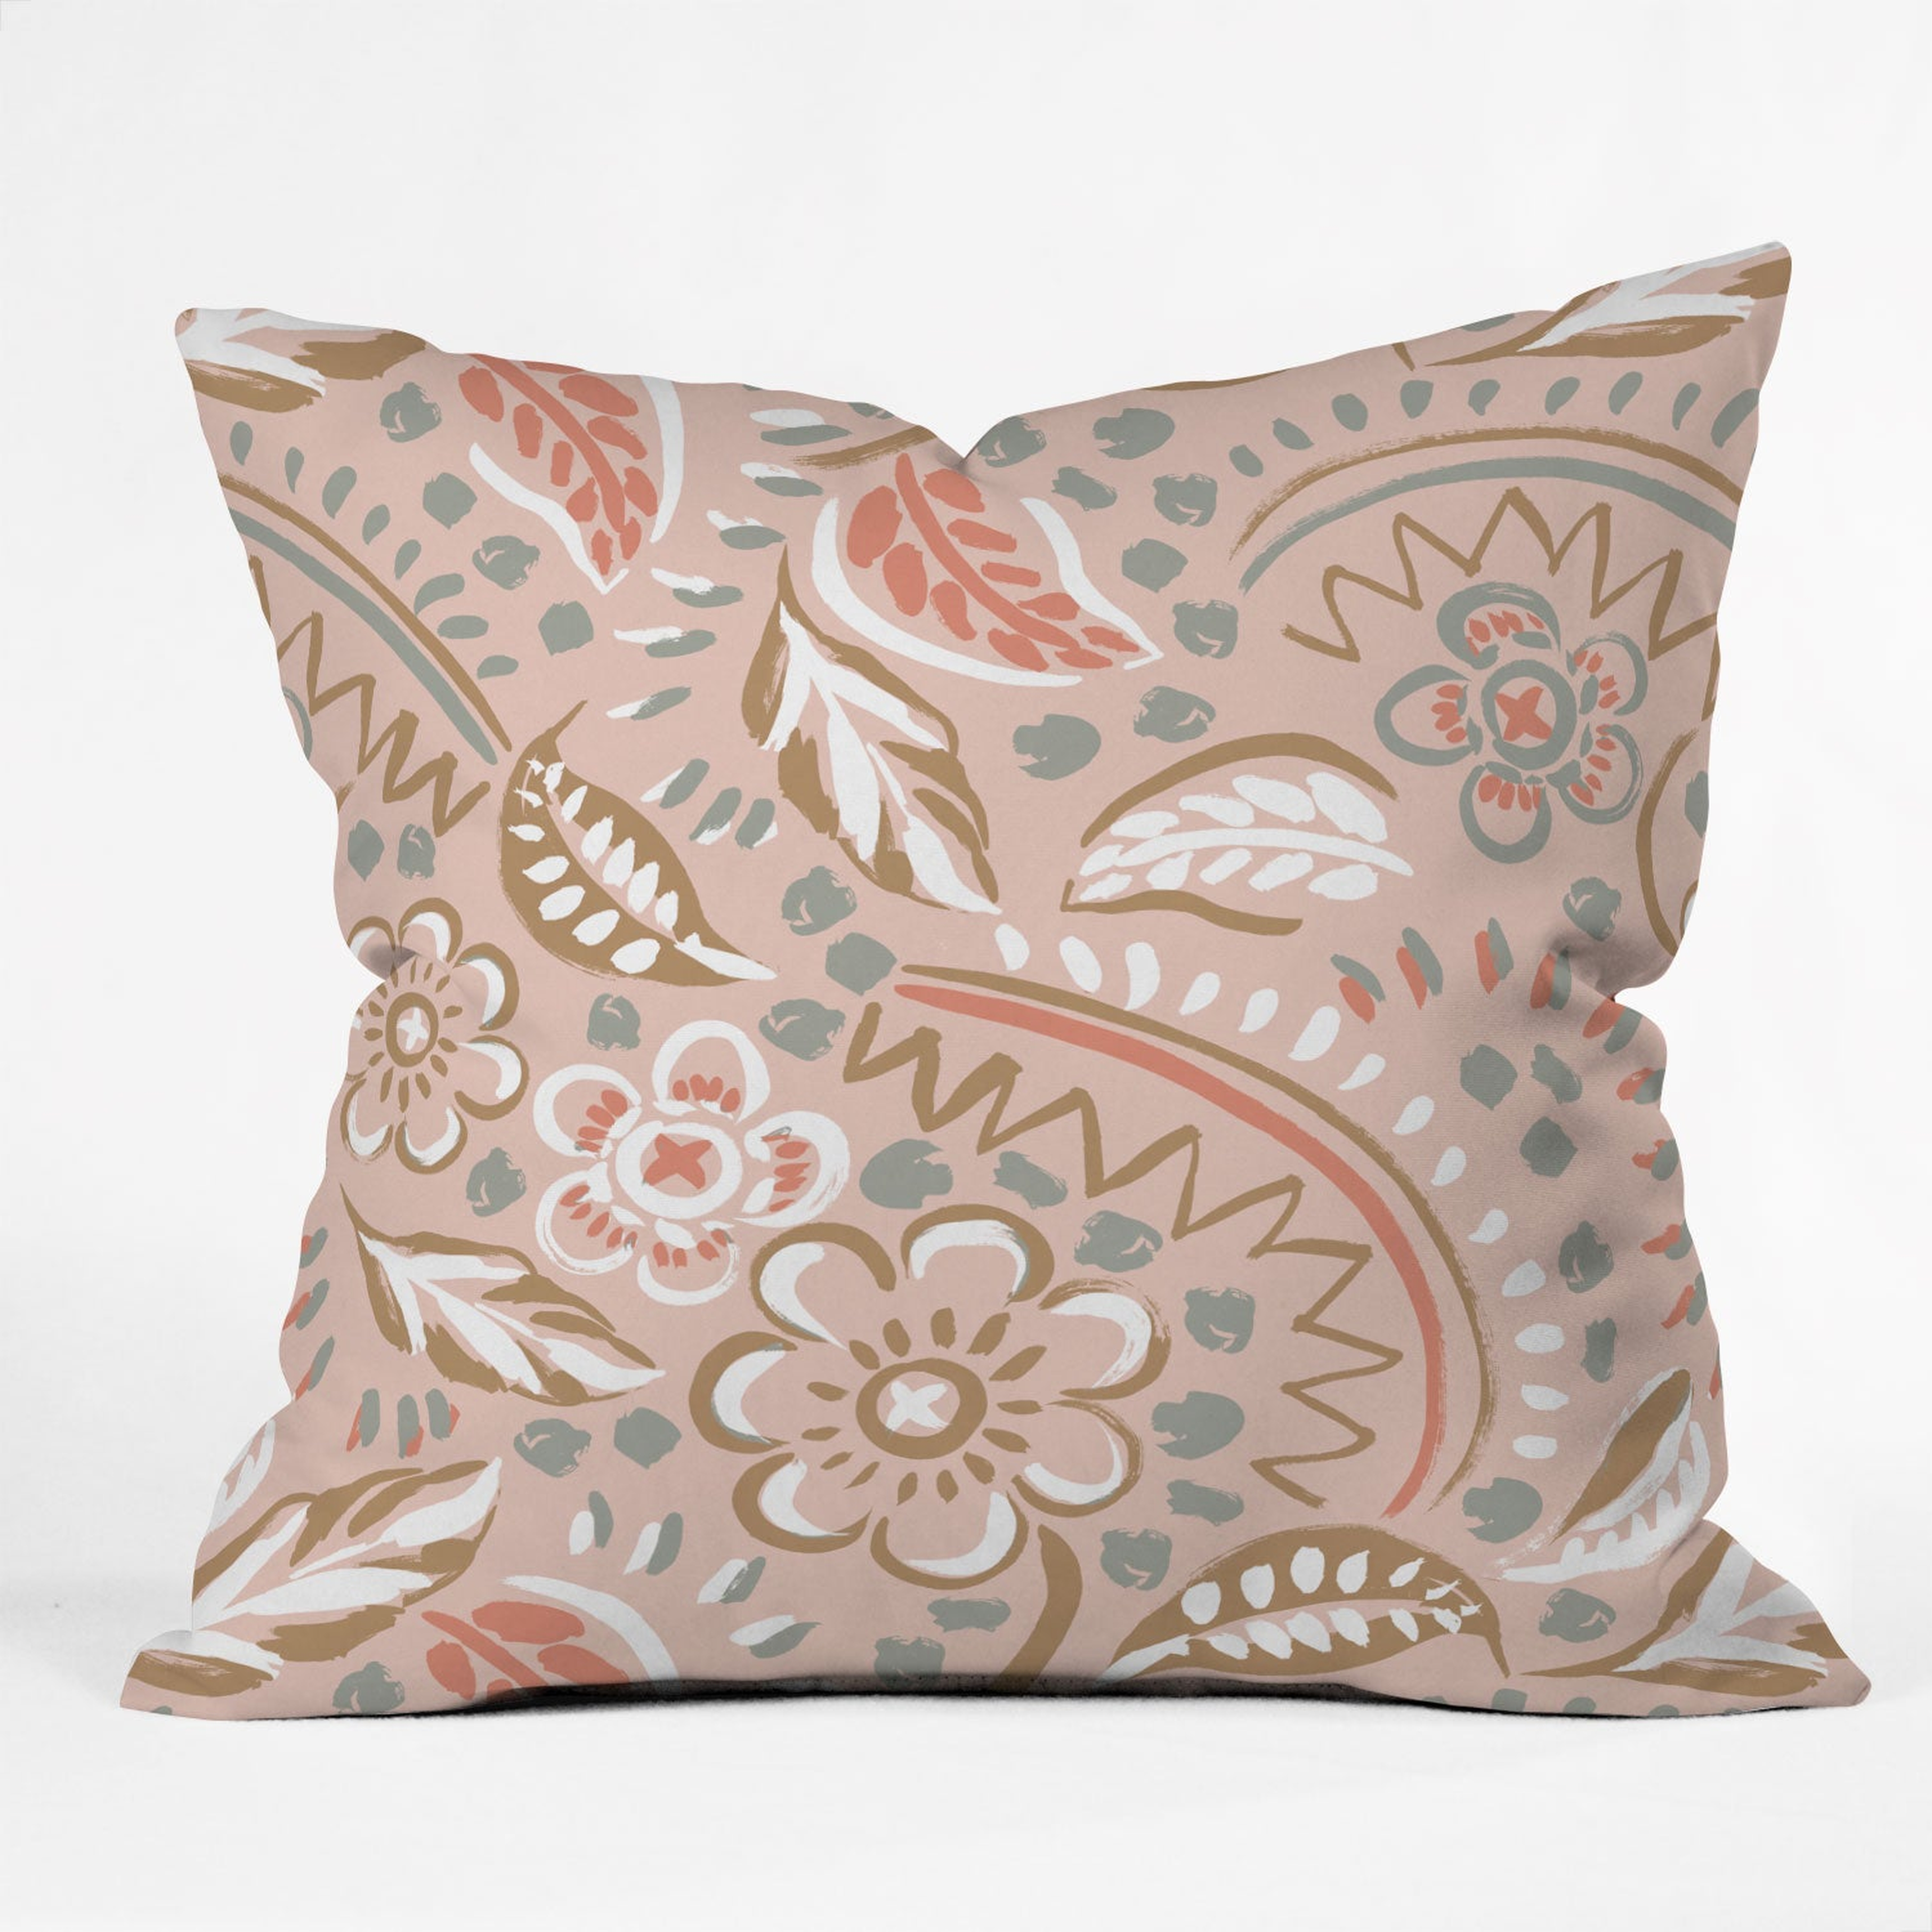 NATIVE FLORAL  BY GABRIELA FUENTE - Outdoor Throw Pillow 20" x 20" - Wander Print Co.